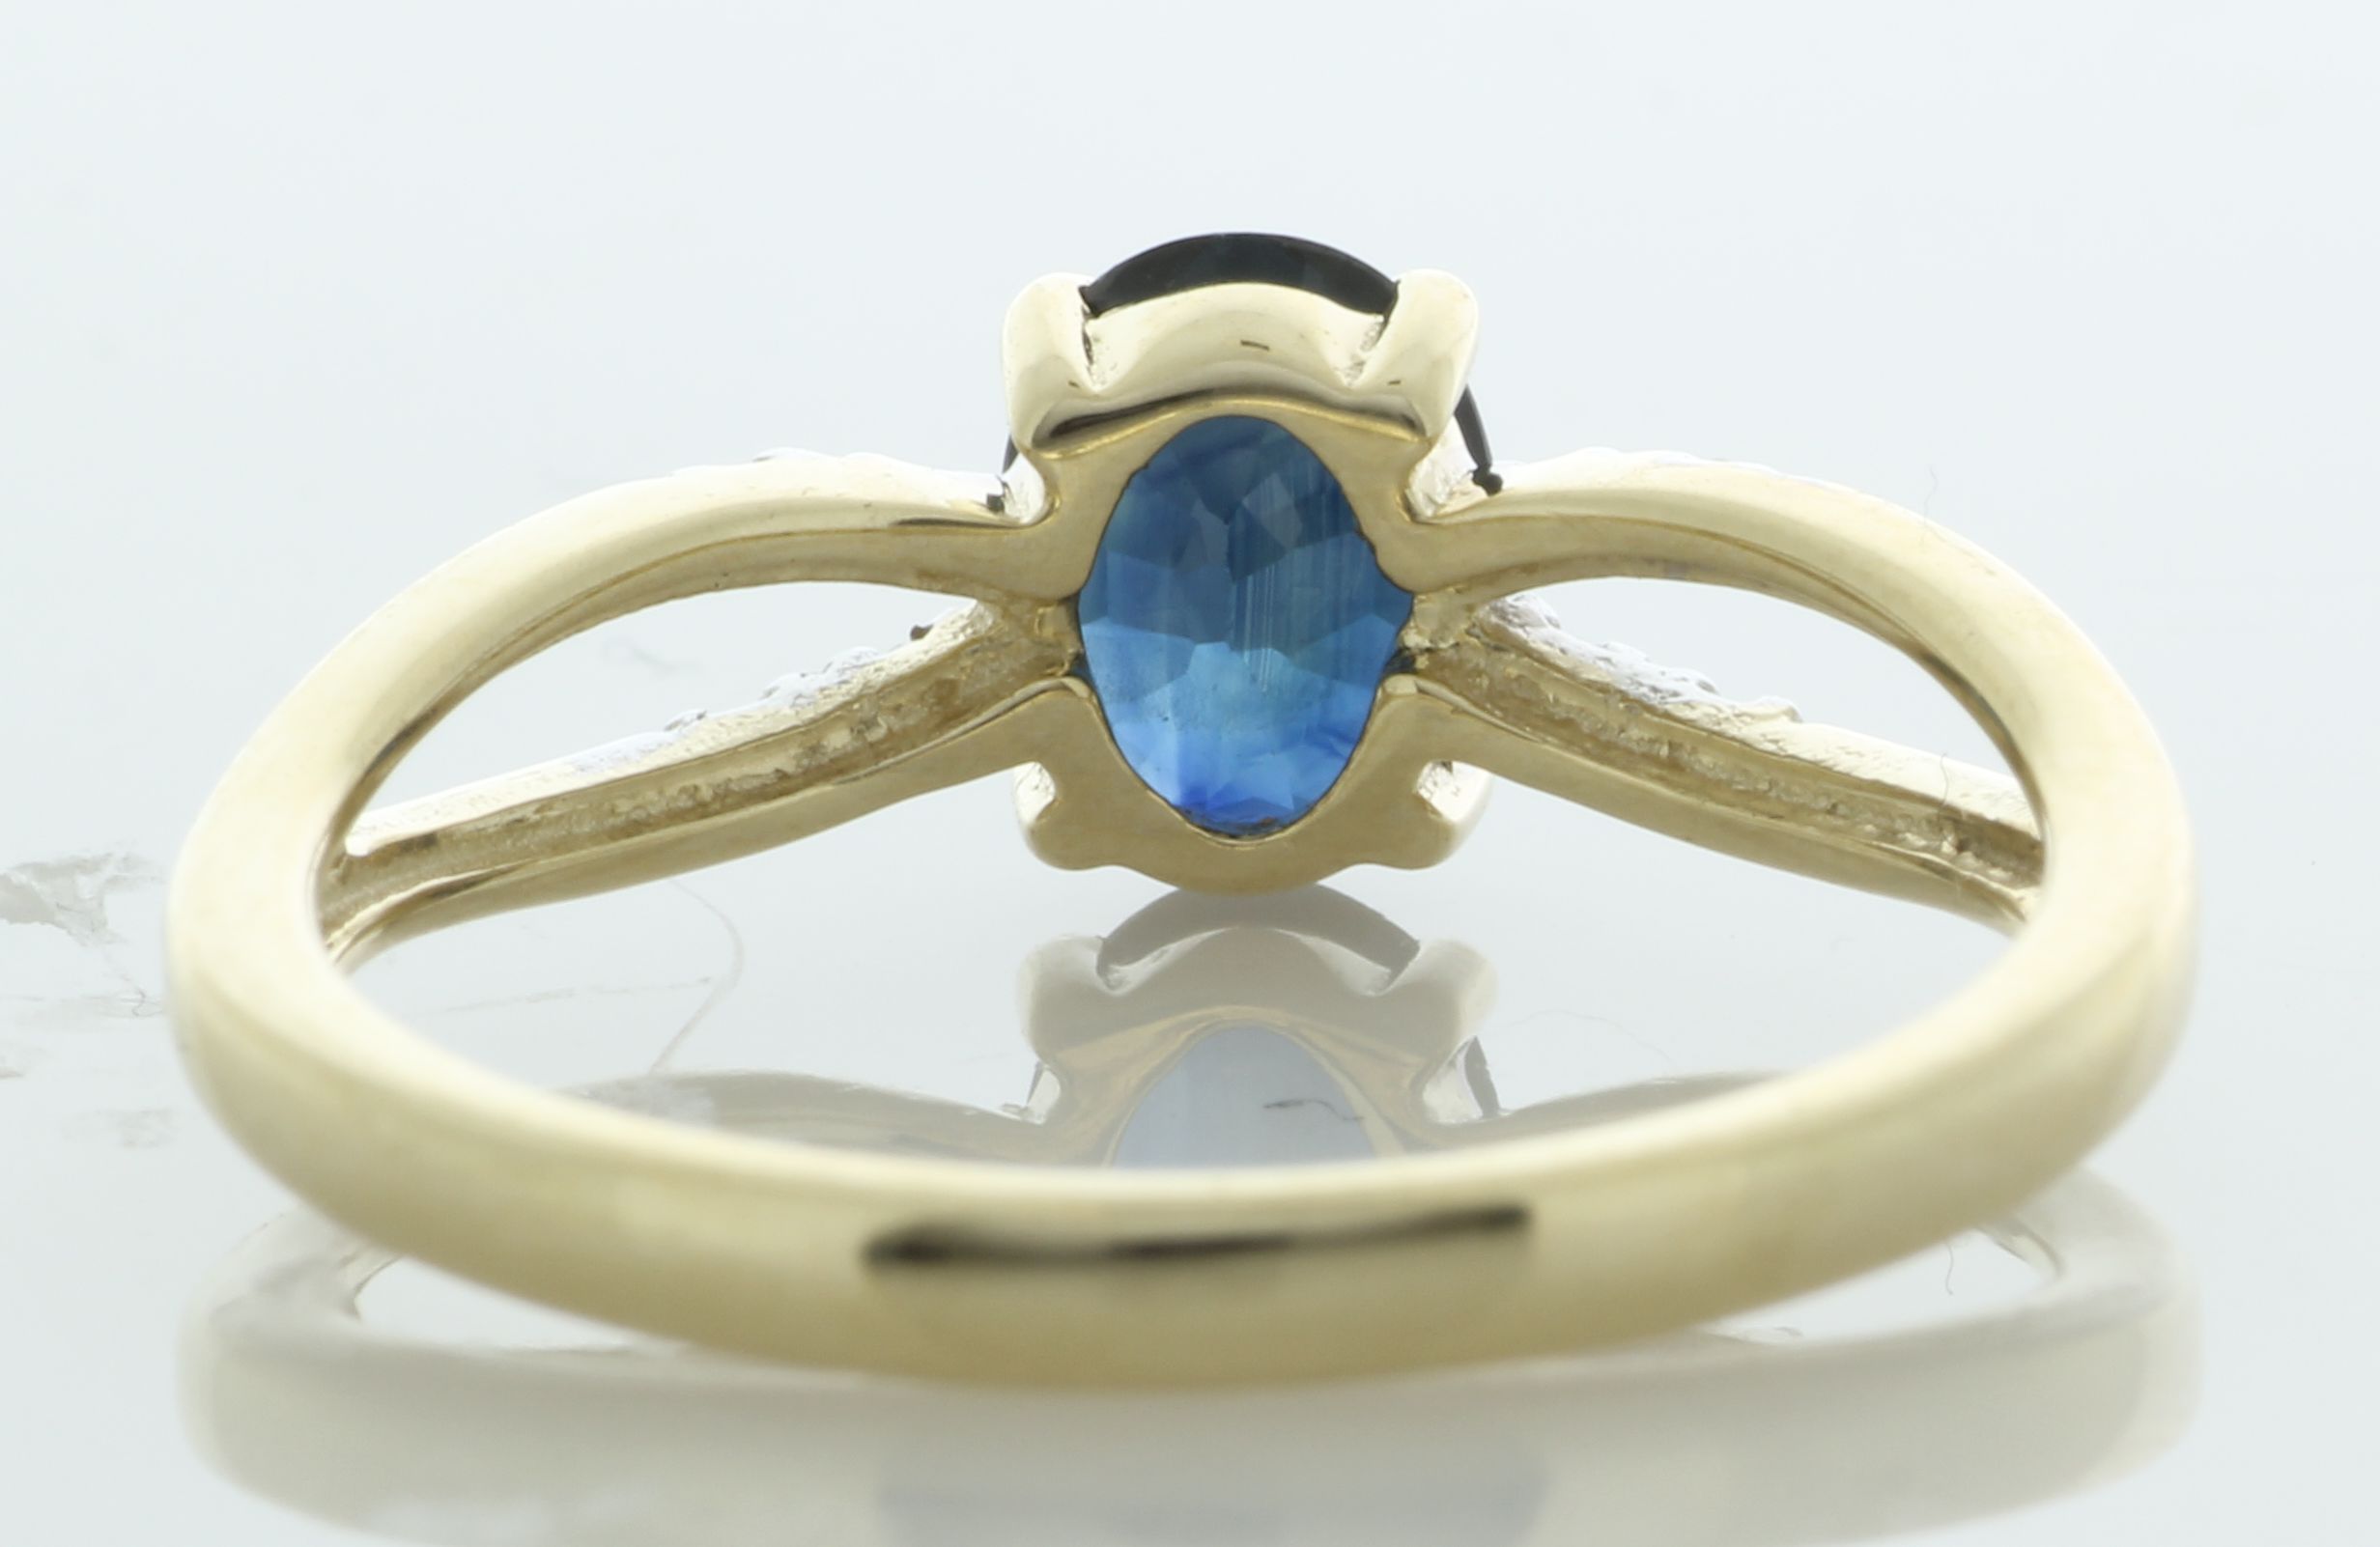 9ct Yellow Gold Diamond and Sapphire Ring (S0.96) 0.03 Carats - Image 3 of 4